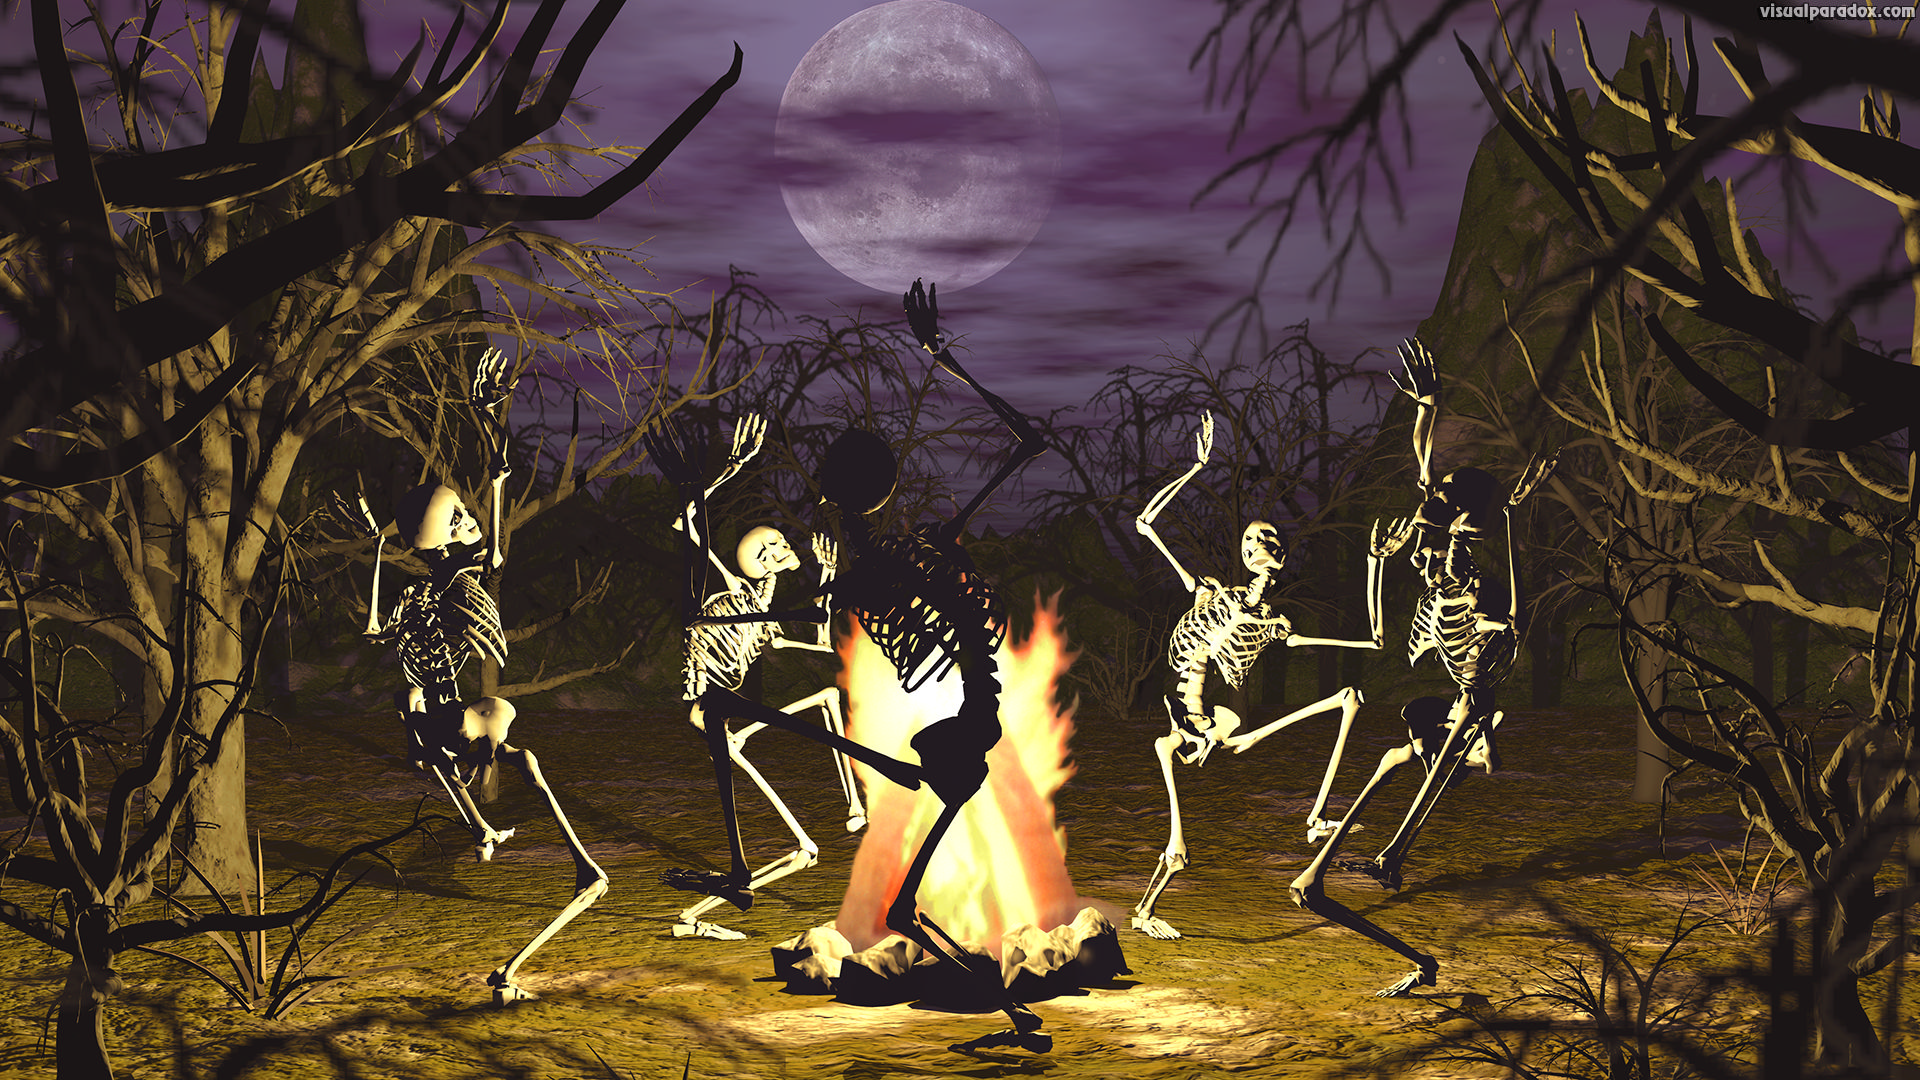 dancing, skeletons, campfire, coven, gothic, undead, conjuring, bones, full moon, trees, scary, haunted, halloween, skeleton, 3d, wallpaper